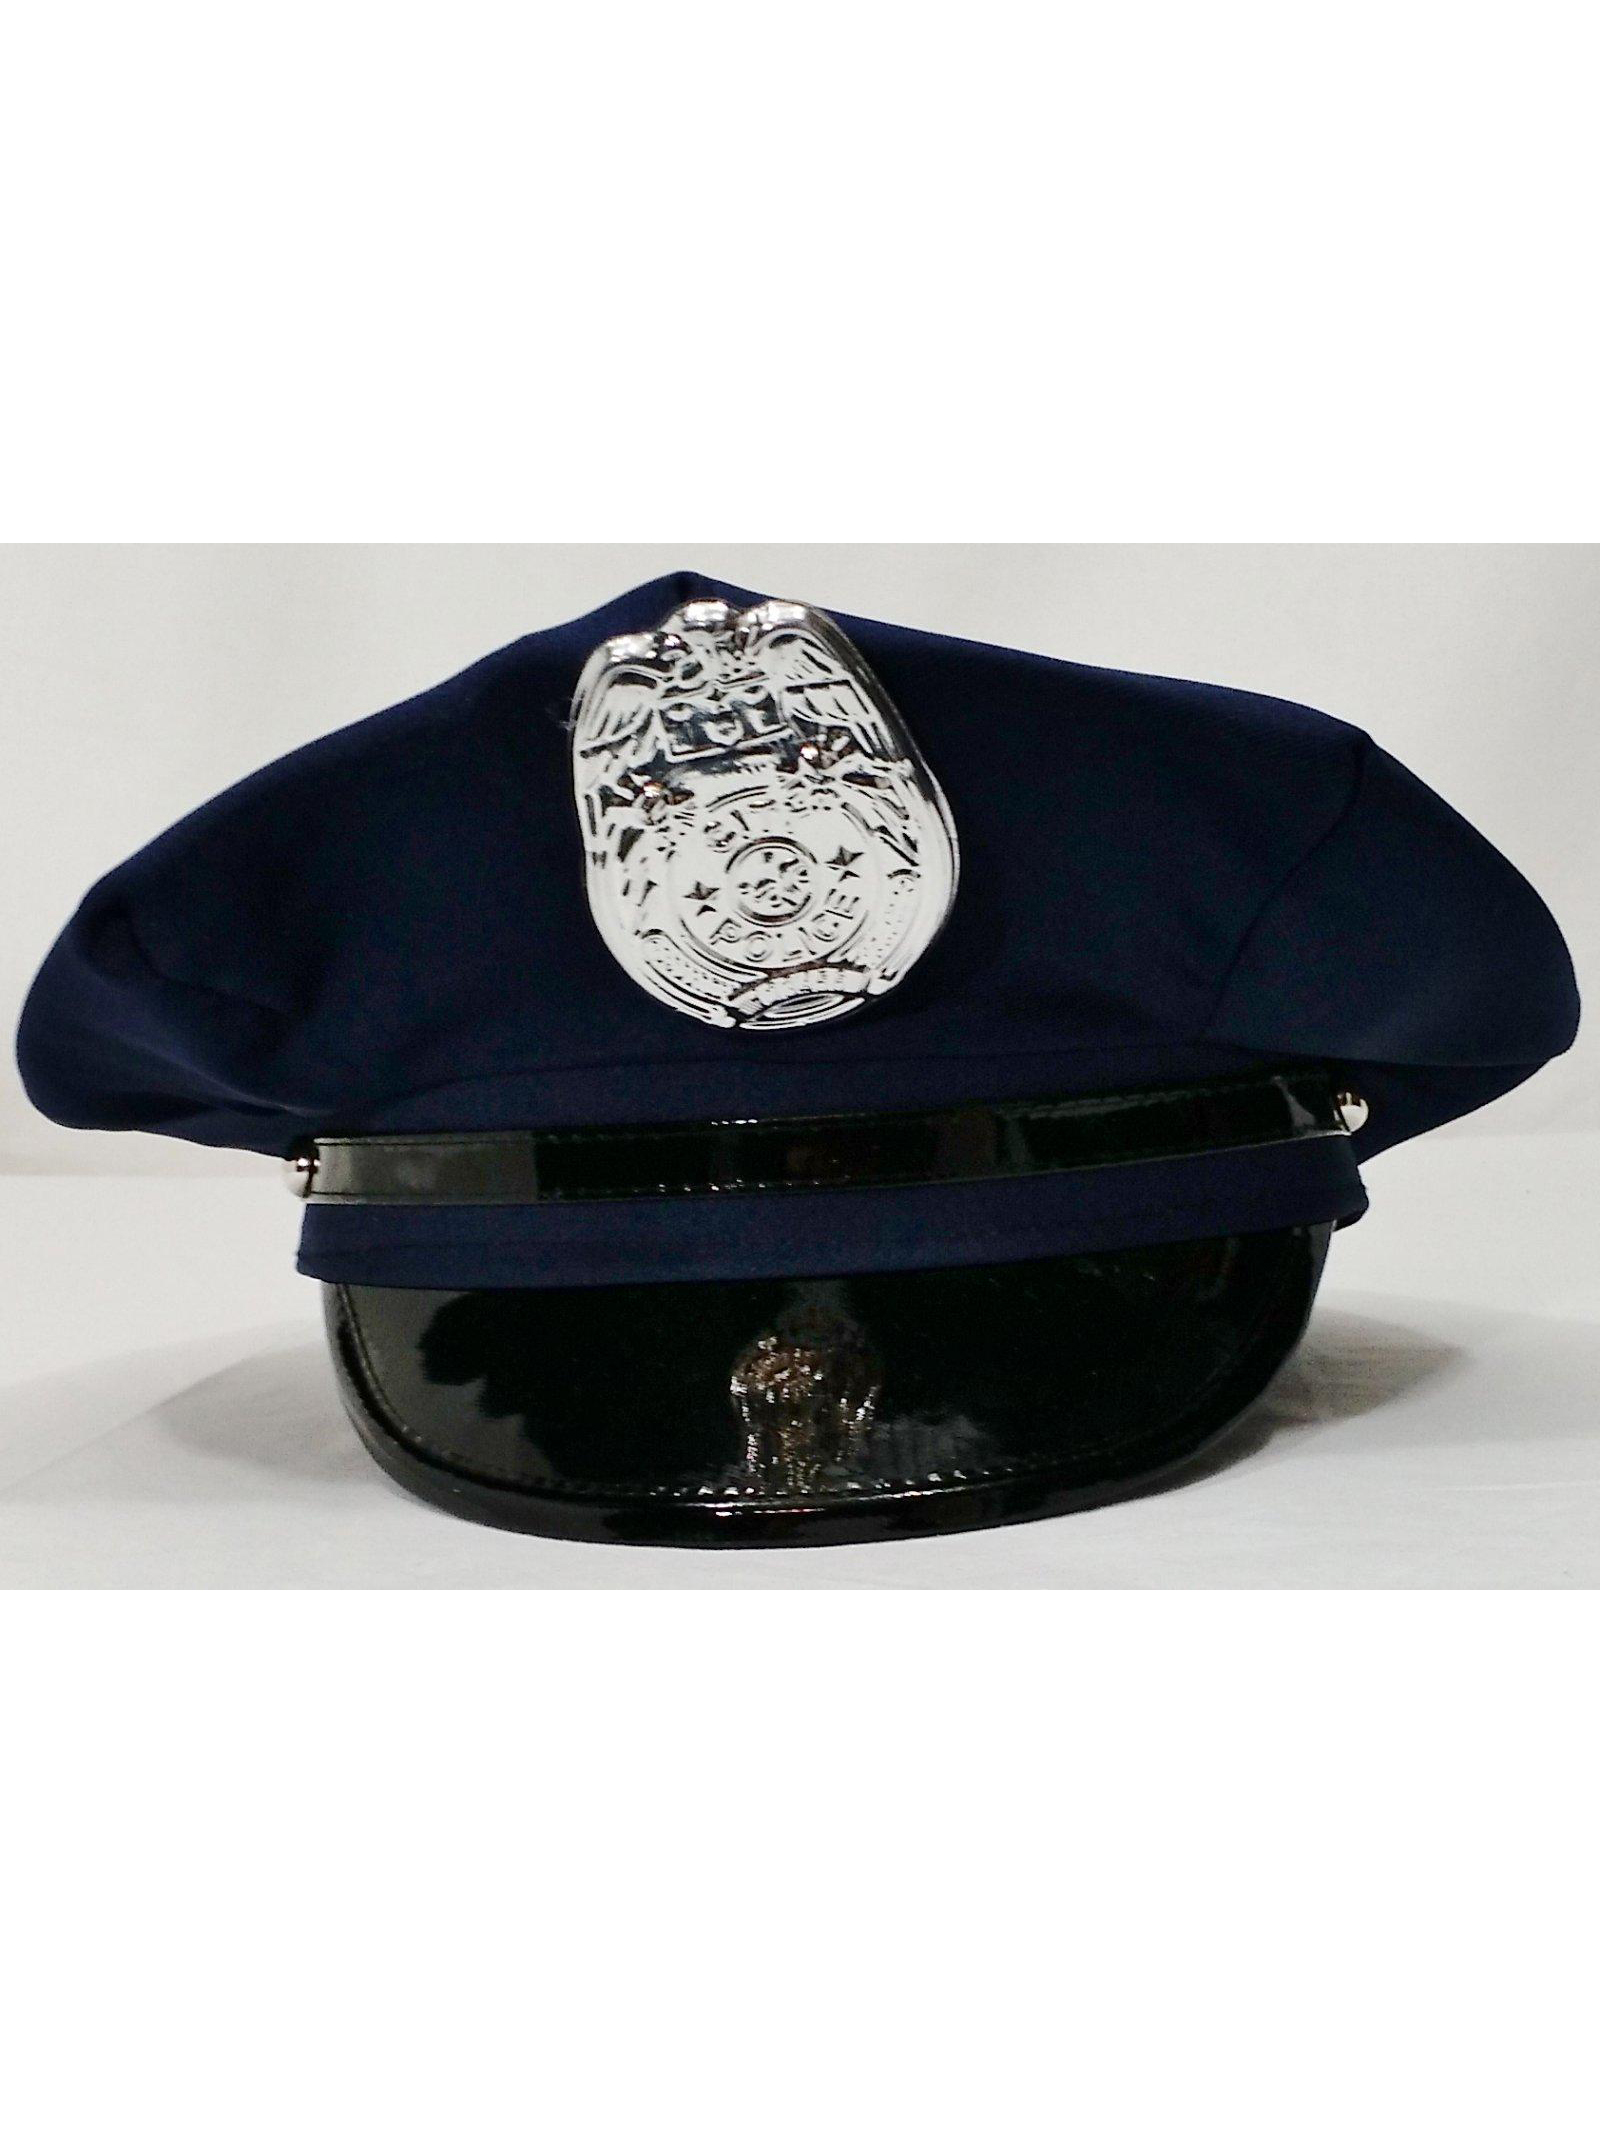 WMU 563840 Blue Cloth Police Hat with Vinyl Visor and ''Special Police'' Badge - image 1 of 1